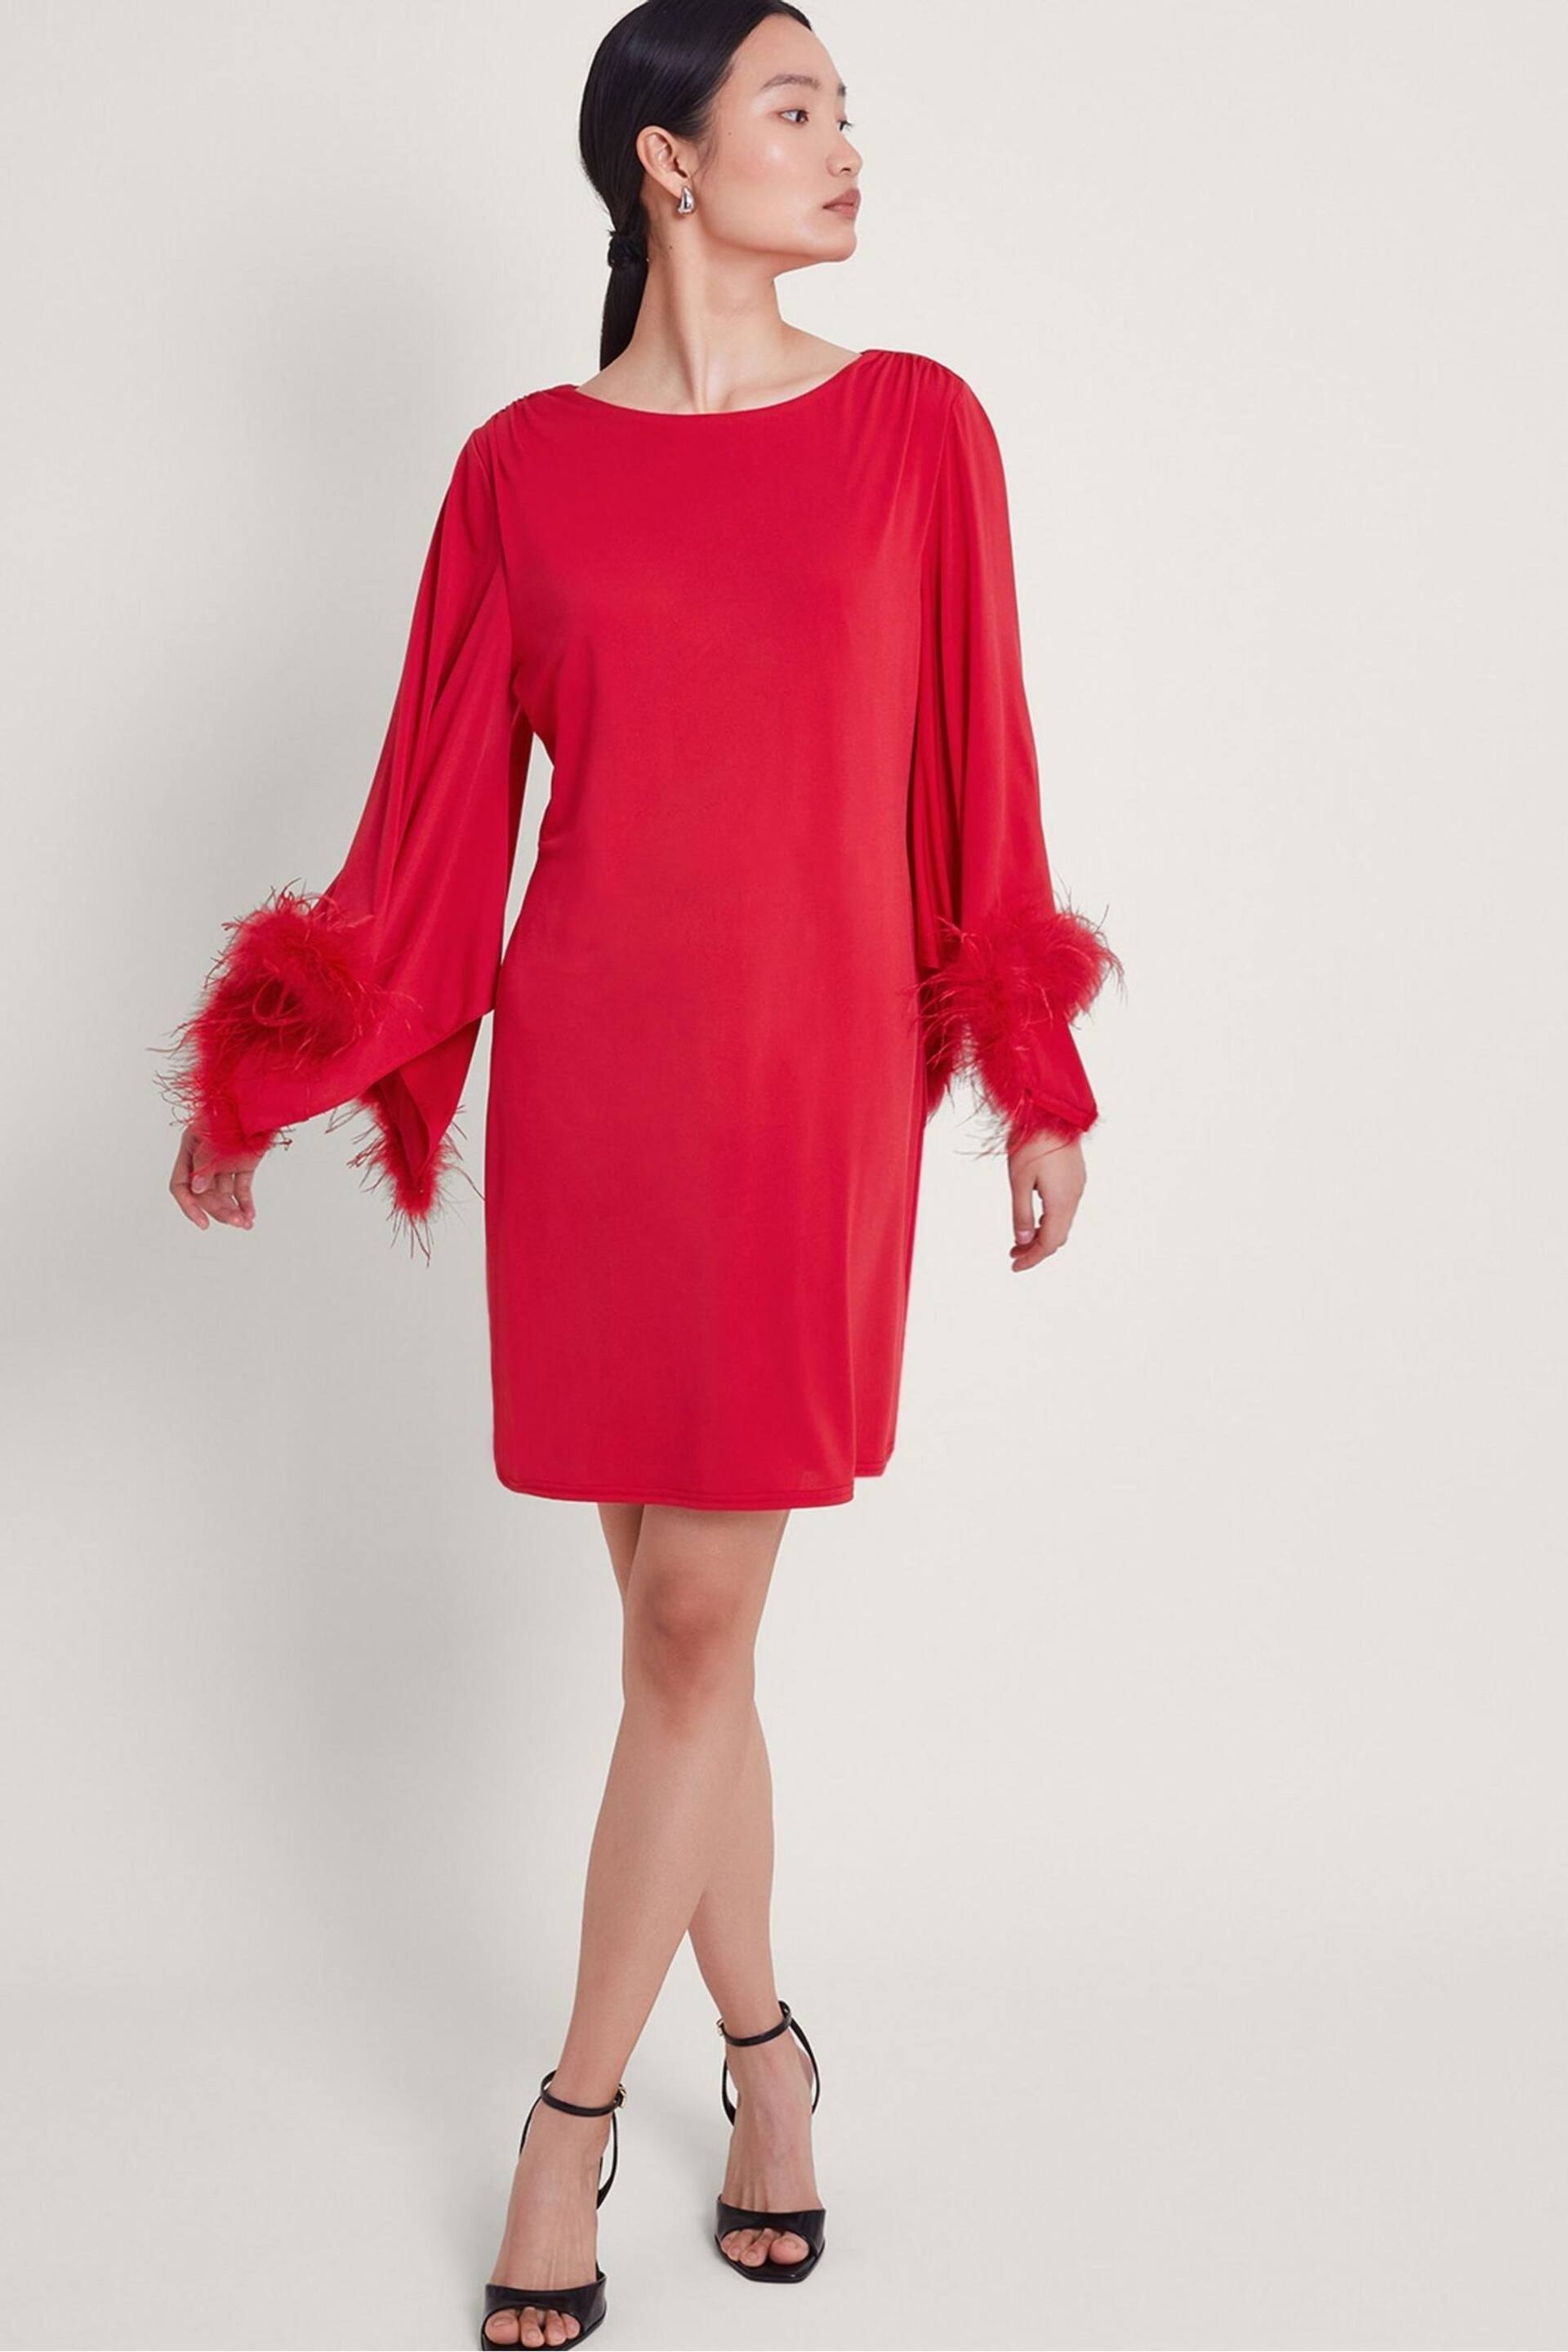 Monsoon Red Fi Feather Tunic Dress - Image 1 of 4